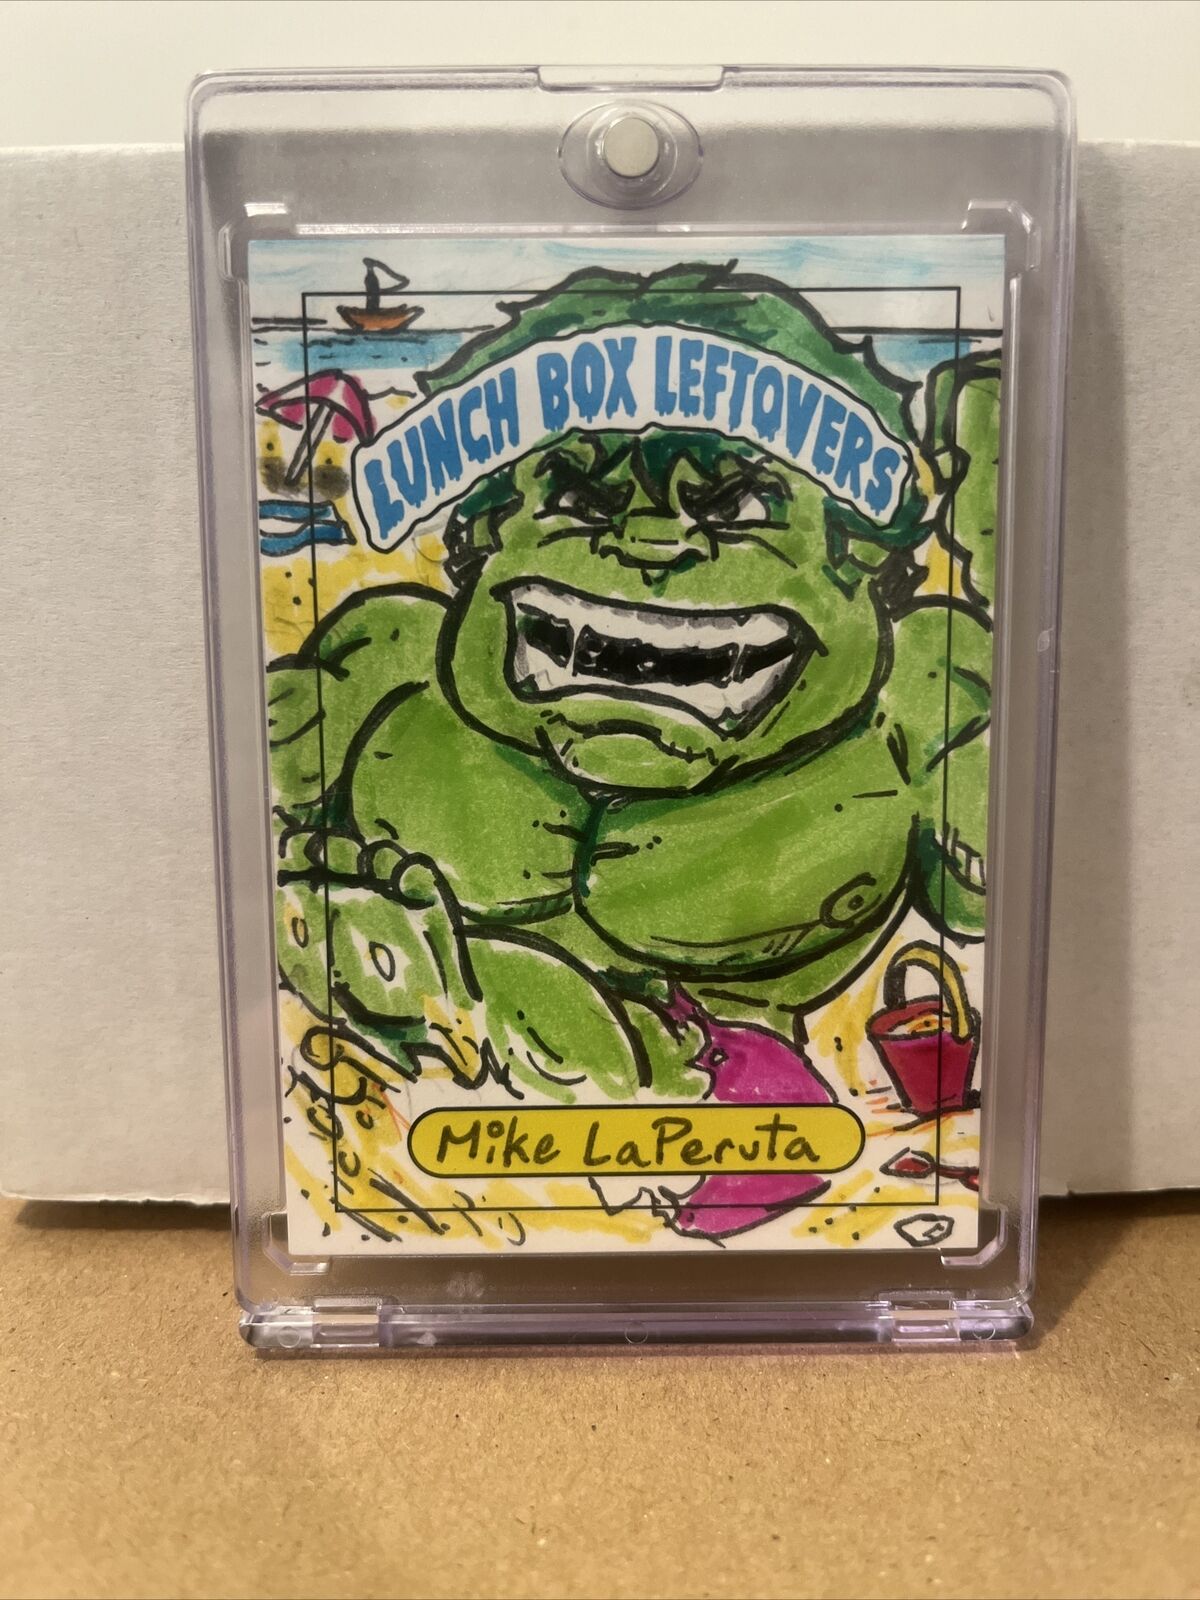 SSFC Lunch Box Leftovers Artist Sketch Card Mike LaPeruta One Of Kind Chase 1/1